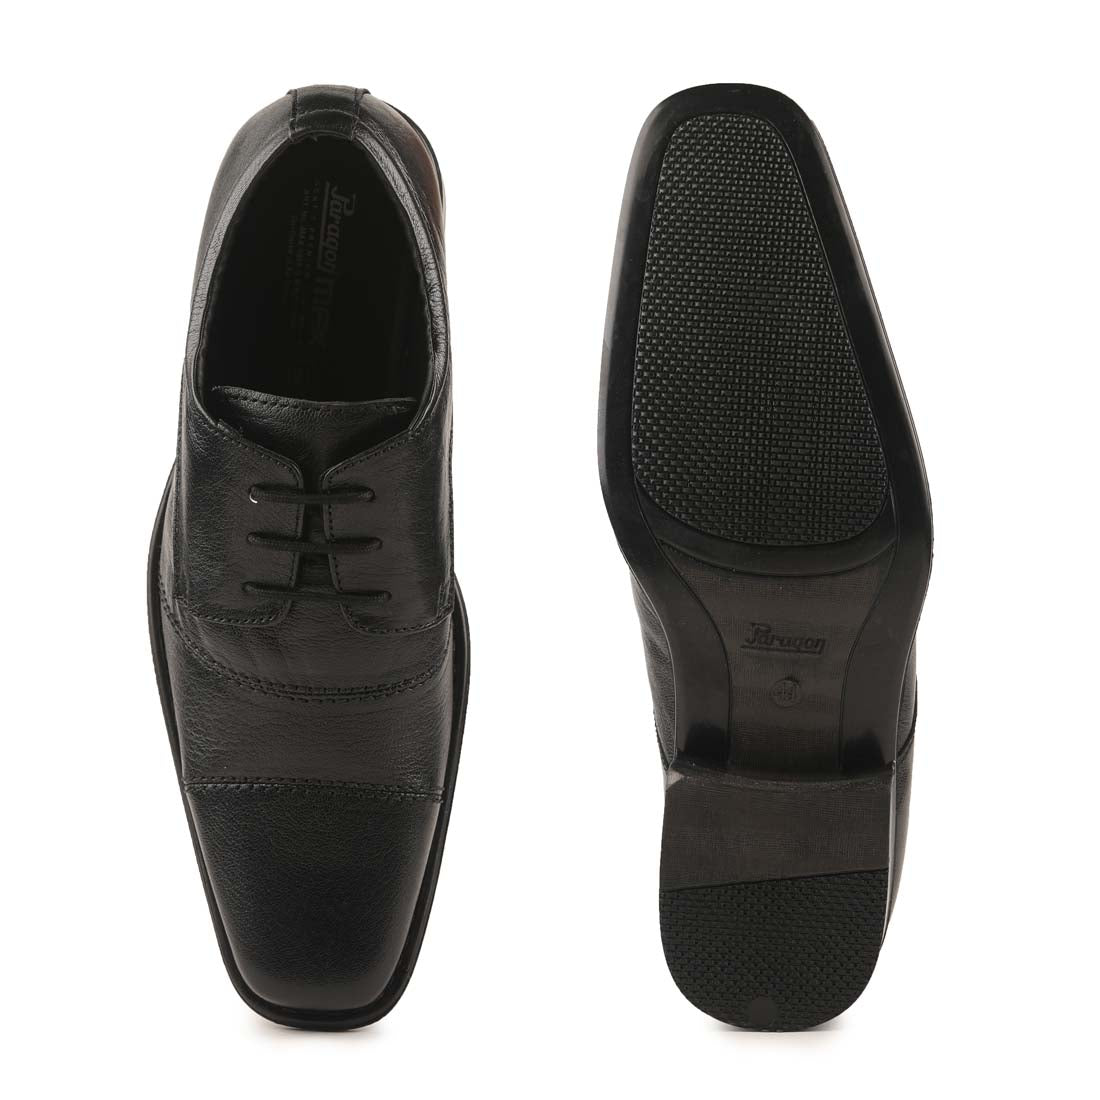 Paragon  RL9809G Men Formal Shoes | Corporate Office Shoes | Smart &amp; Sleek Design | Comfortable Sole with Cushioning | For Daily &amp; Occasion Wear